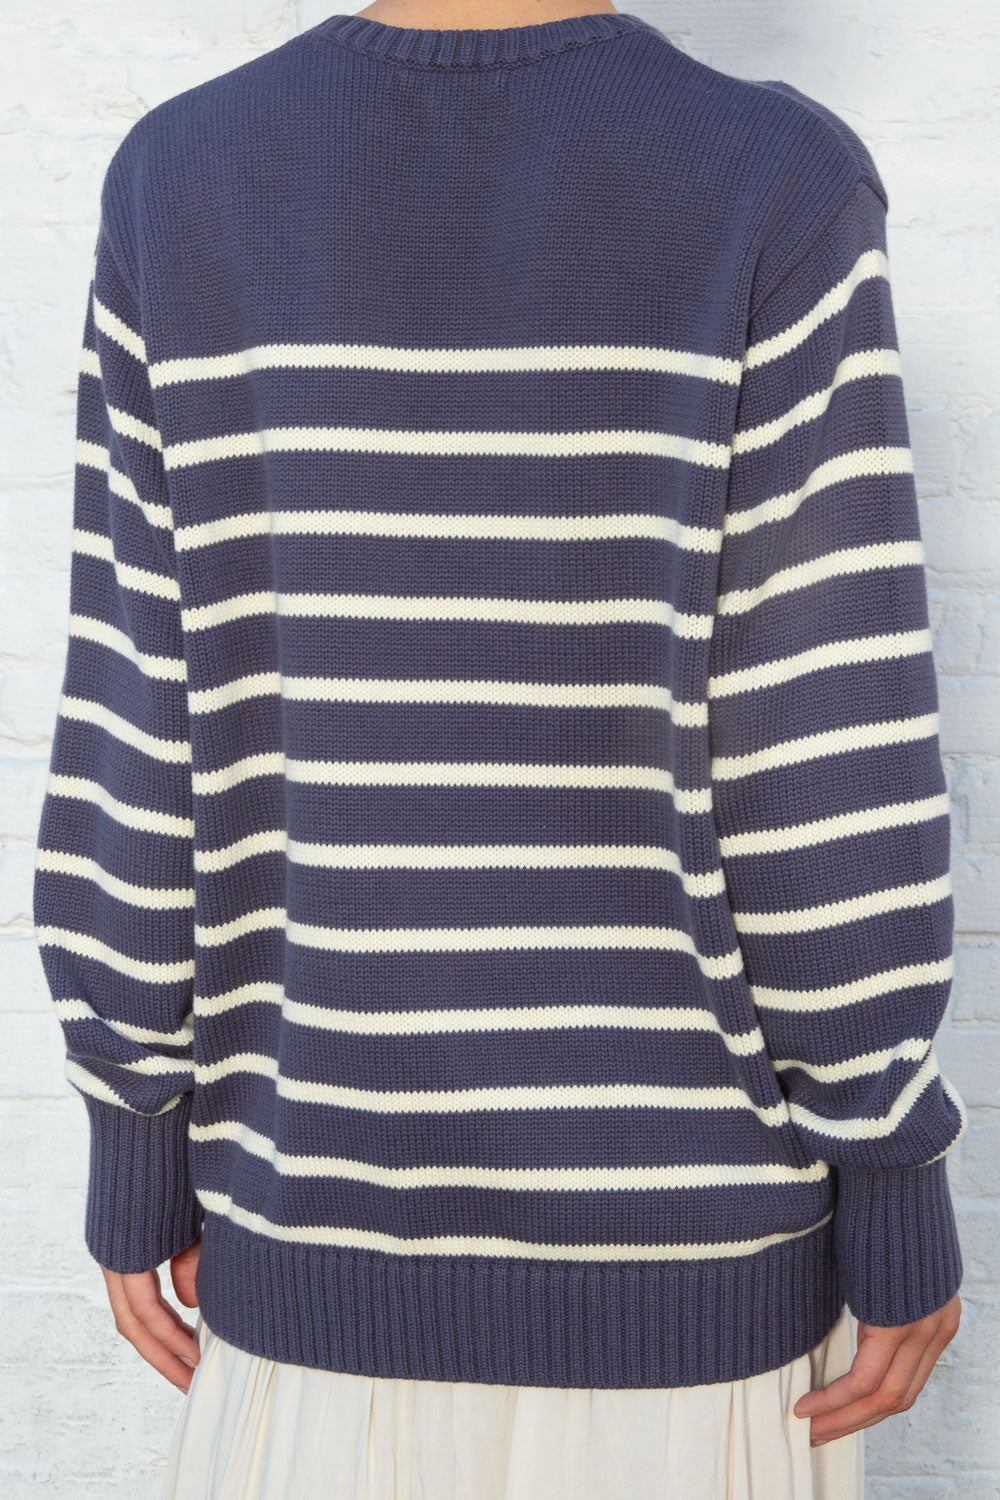 Faded Navy White Stripes / Oversized Fit